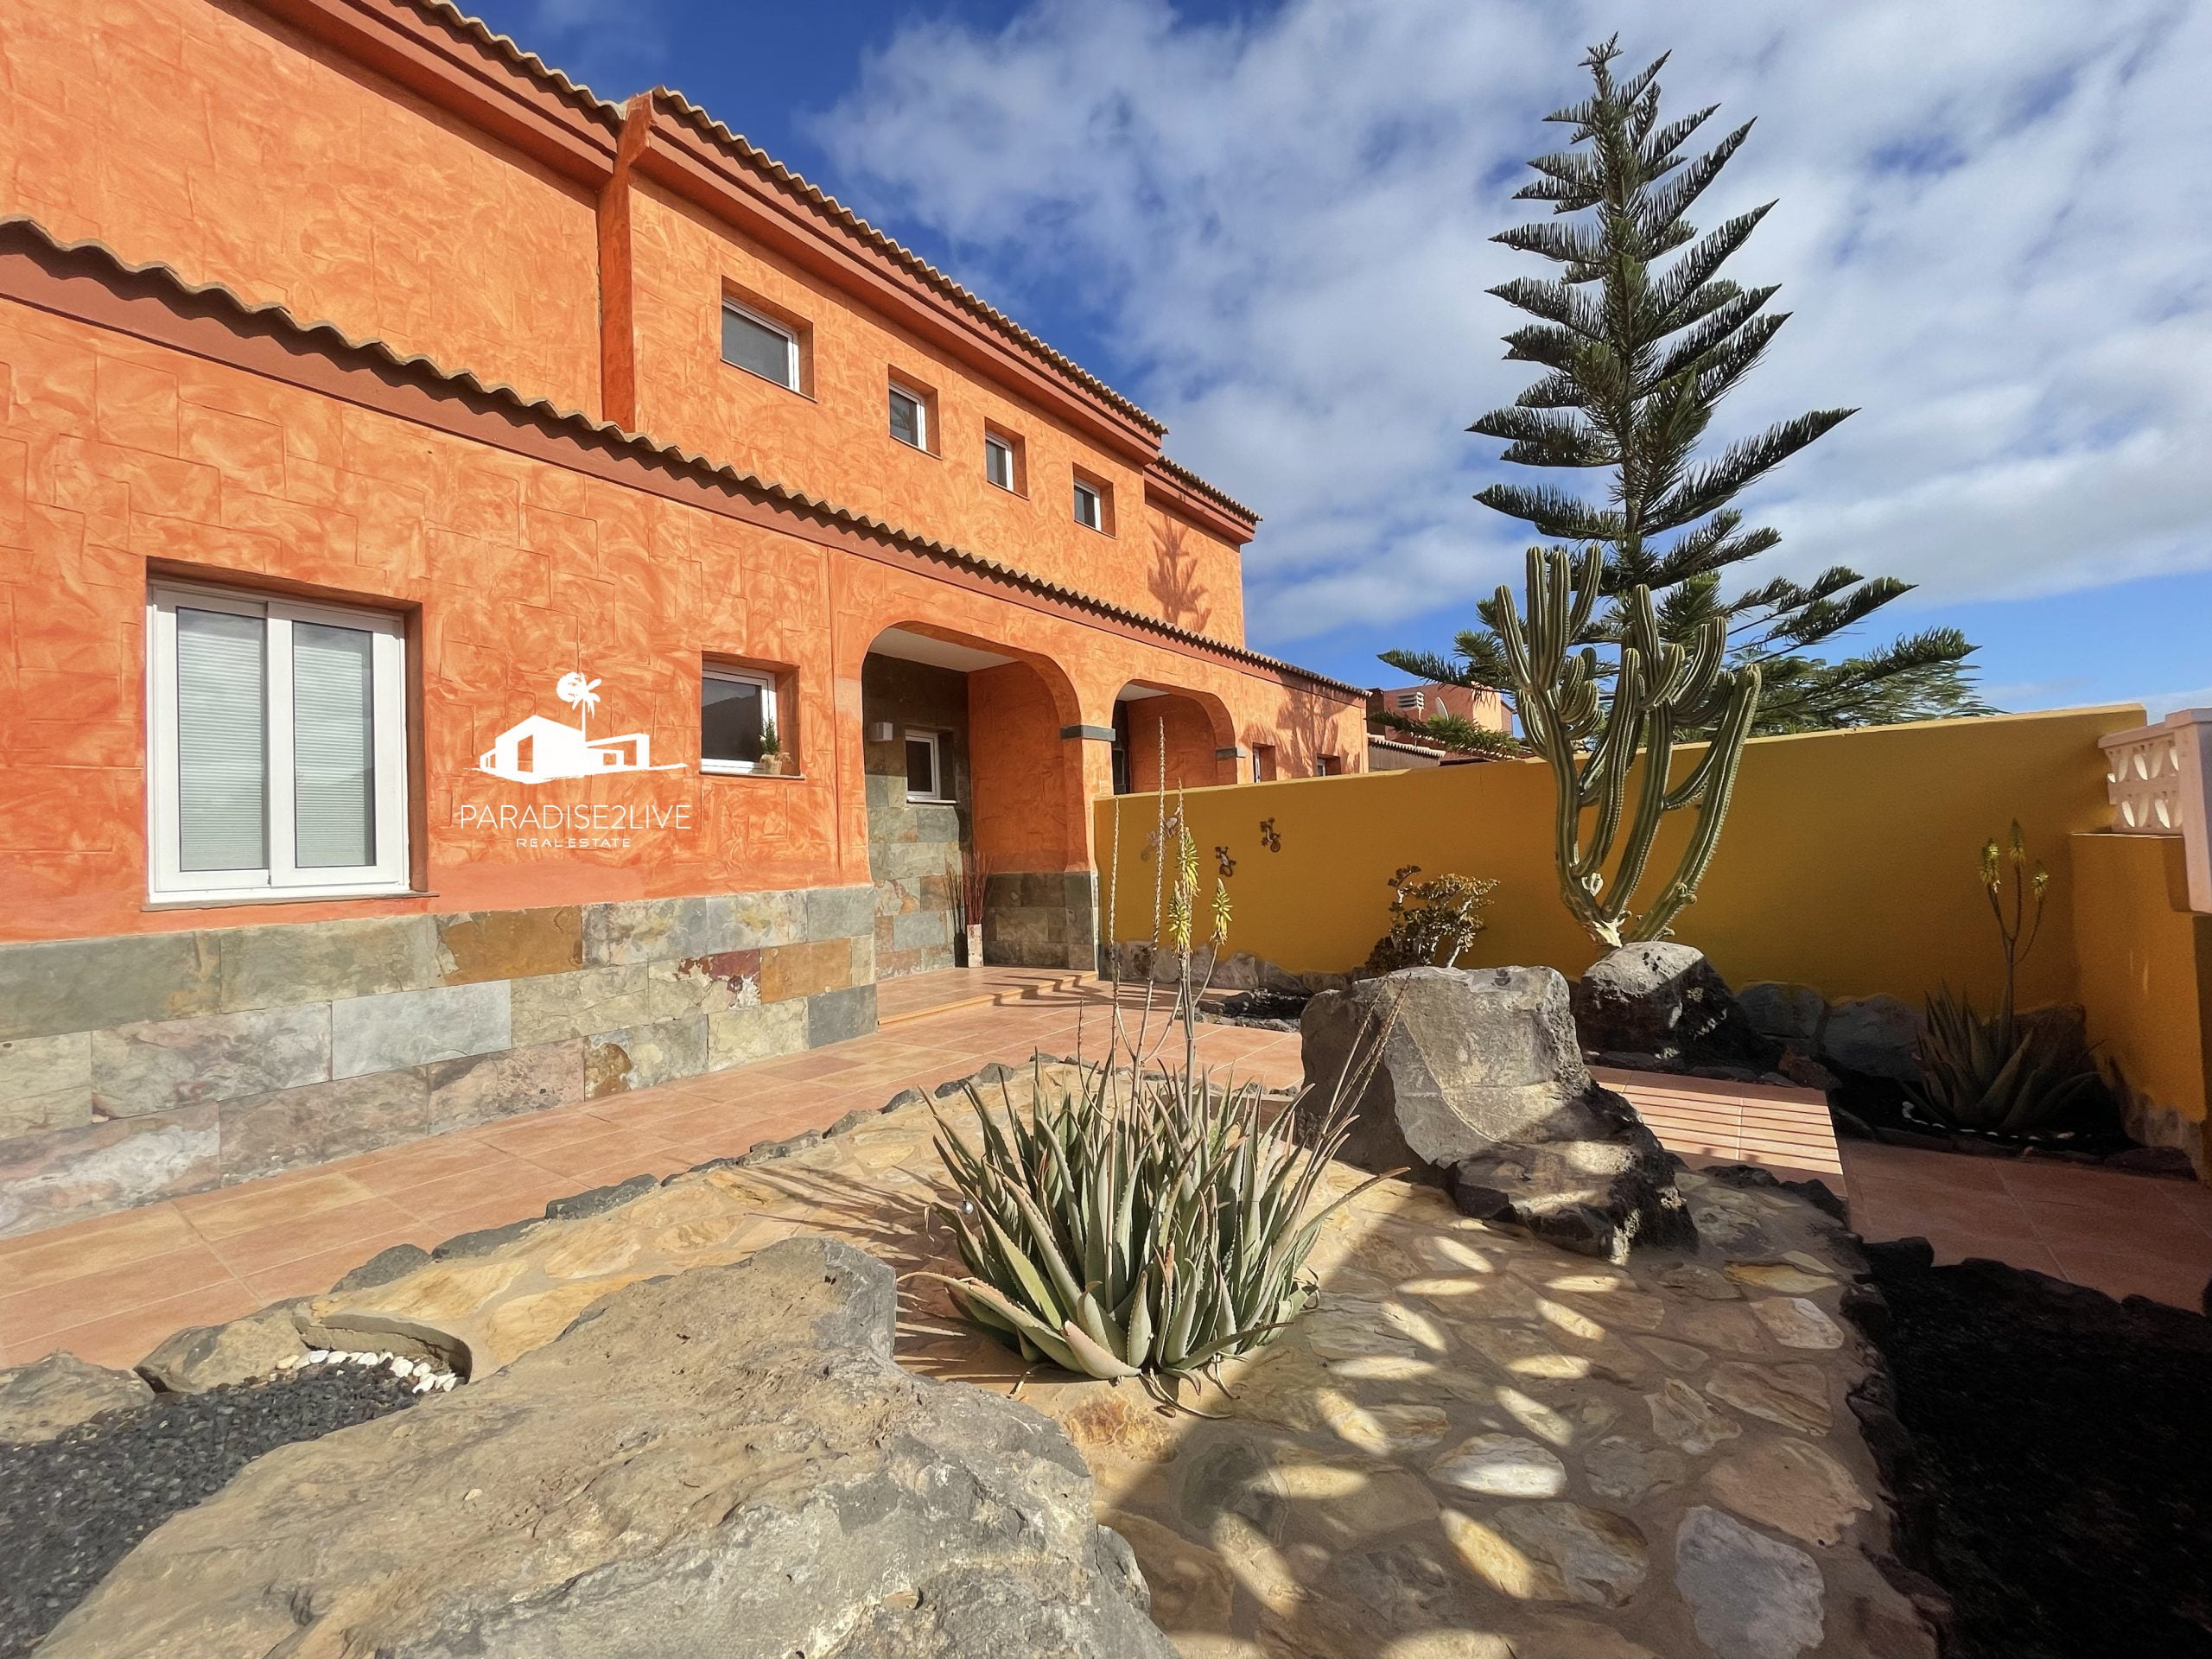 Lovely villa for rent in the upper part of Corralejo, 3 bedrooms 2 bathrooms with beautiful garden